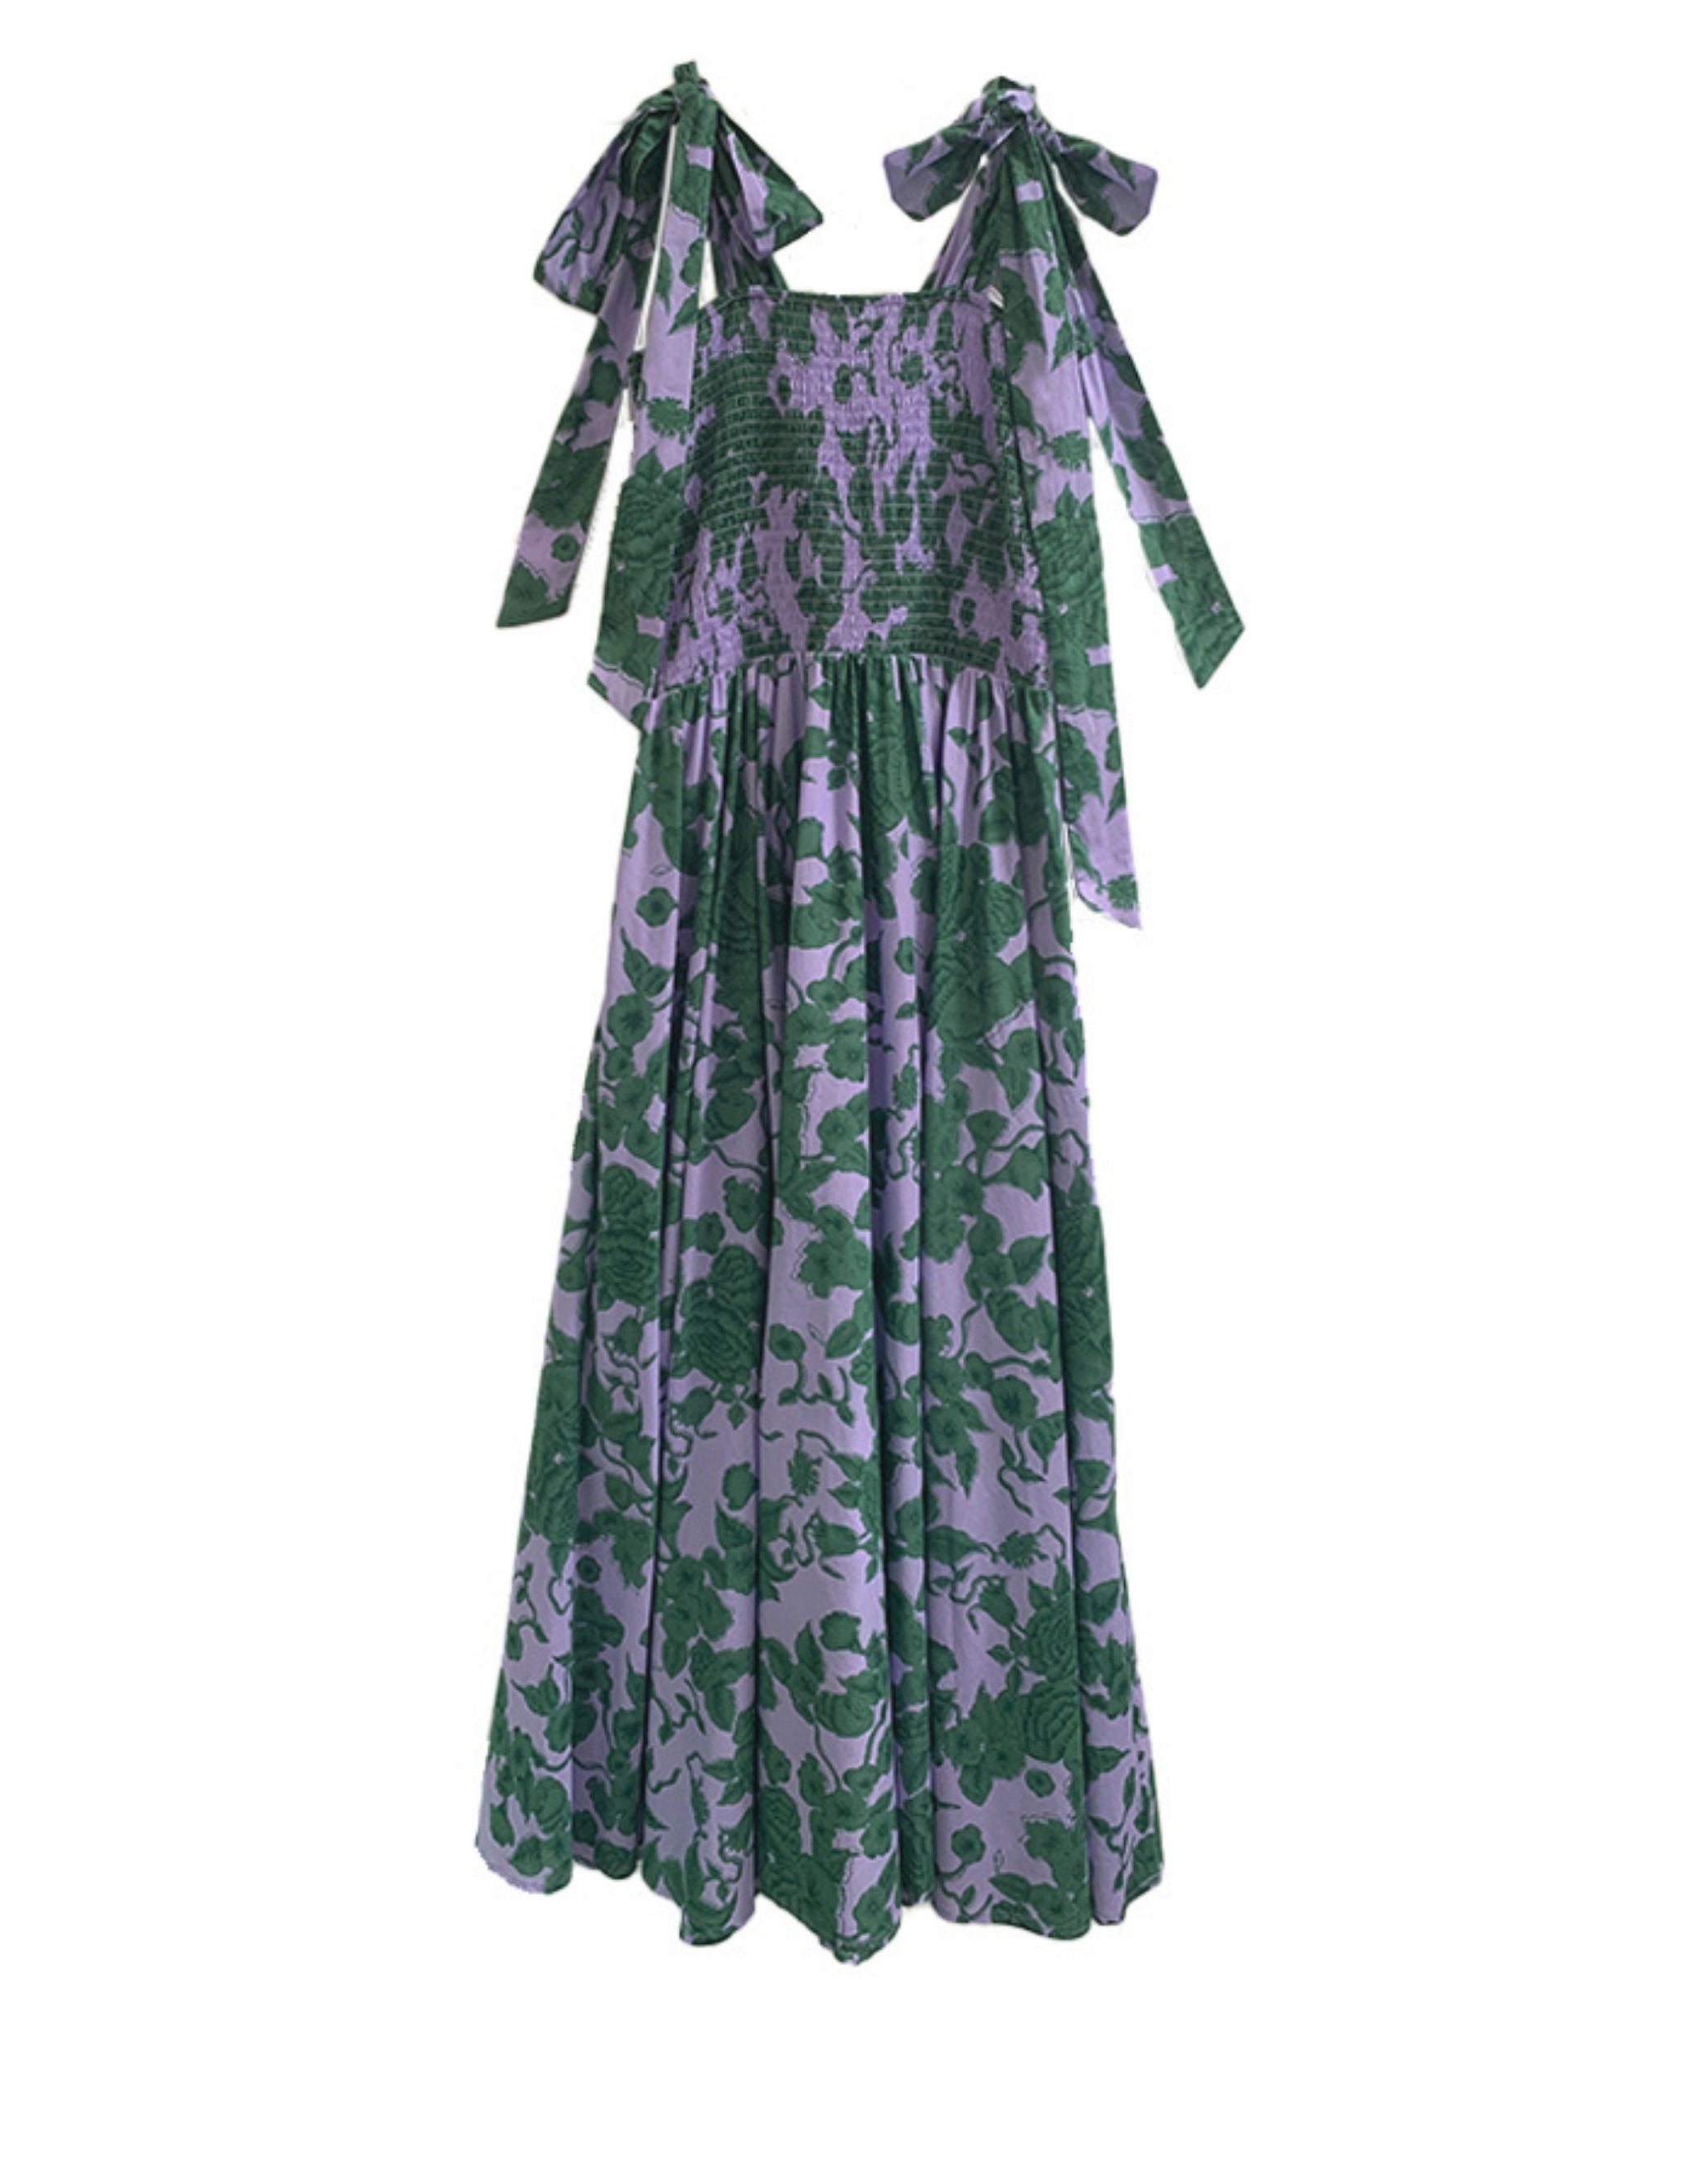 The Brooke - Sun Dress - So many ways to Wear and Tie. In Lilac and Green Floral.